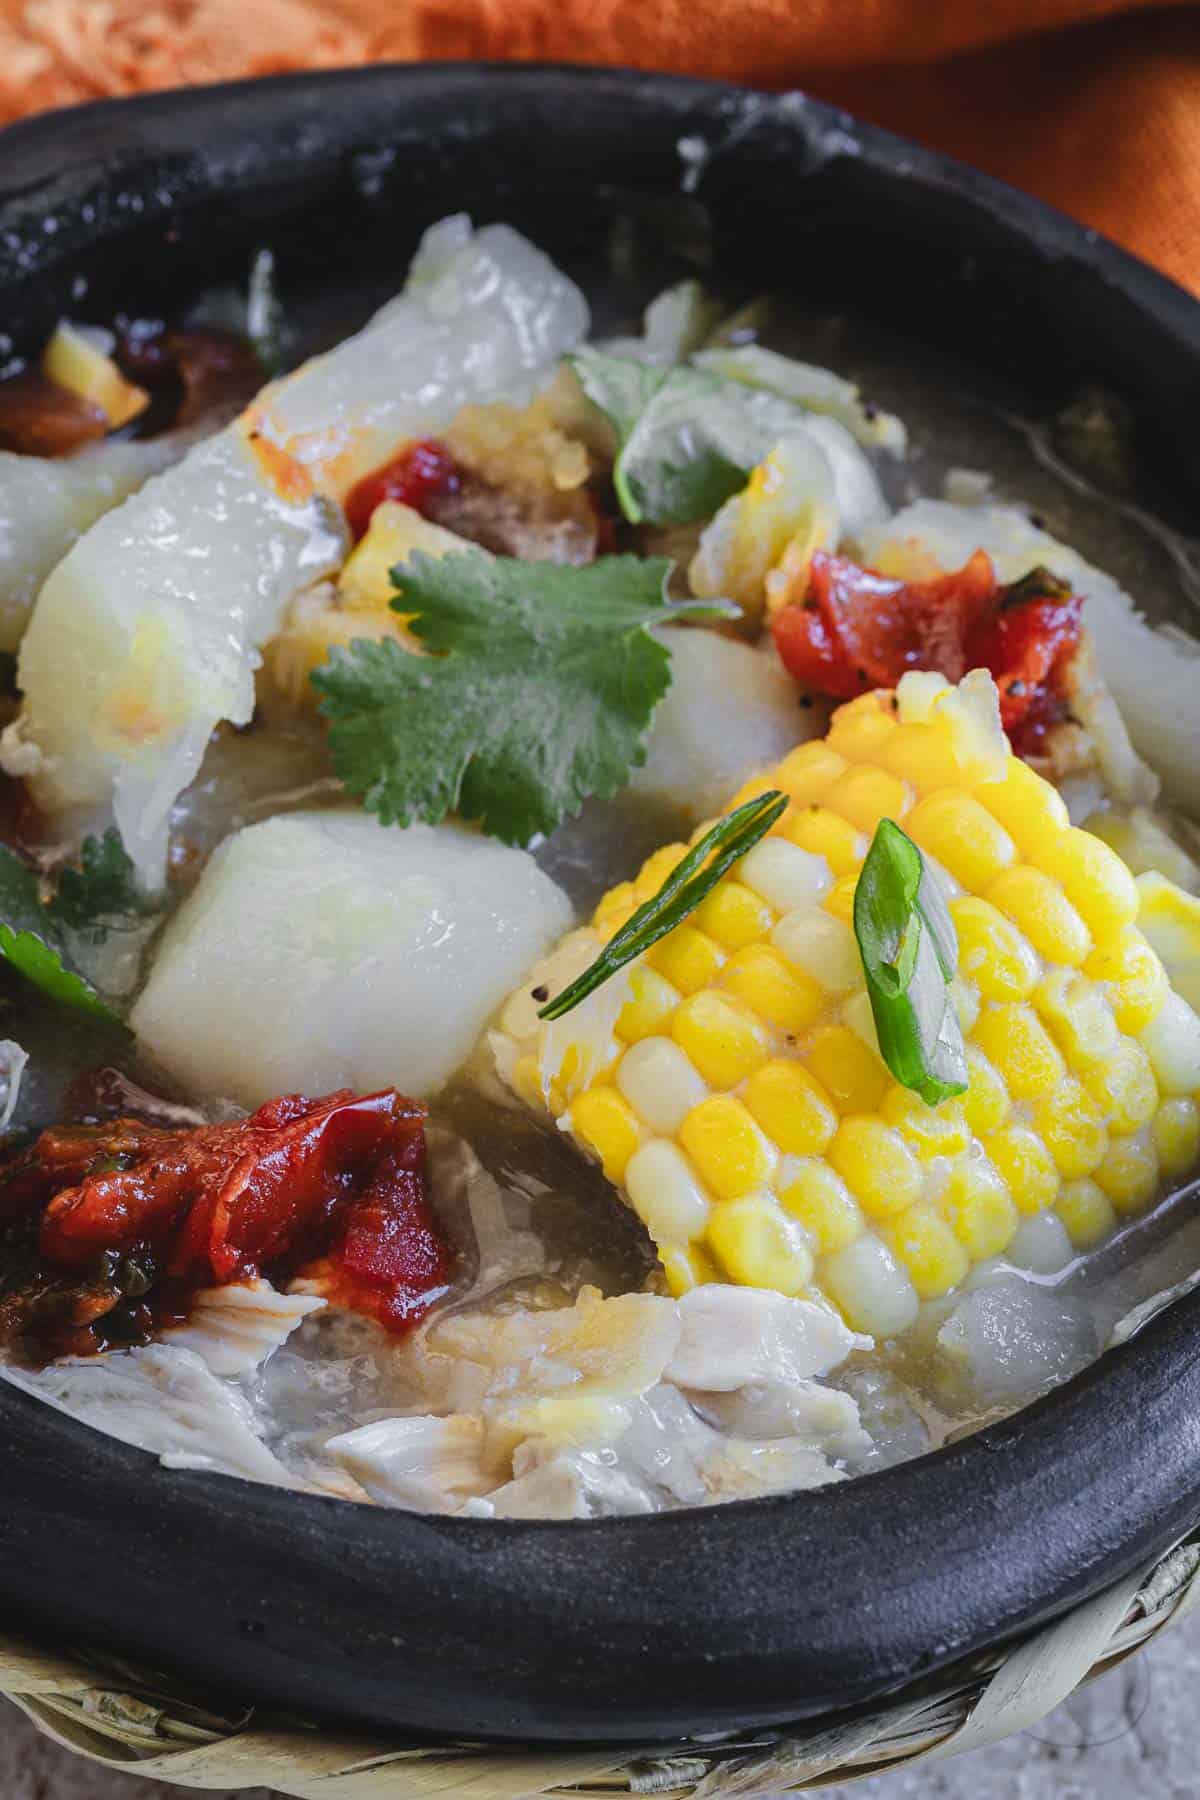 A colombian chicken sancocho stew served in a black stone pot, garnished with corn, cilantro, and red peppers.